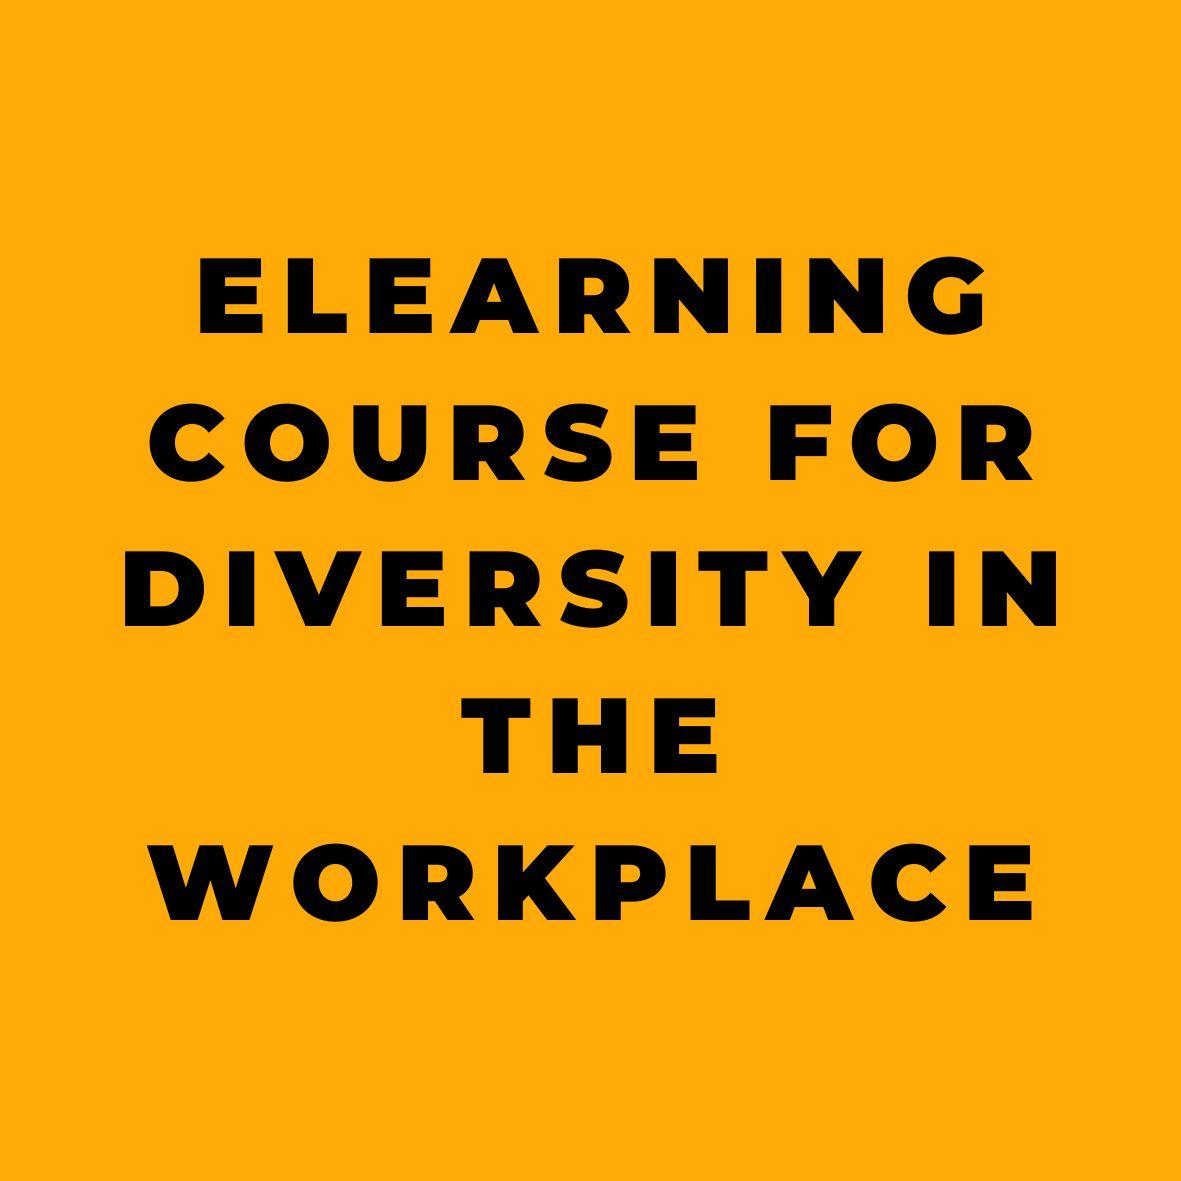 eLearning Course for Diversity in the Workplace